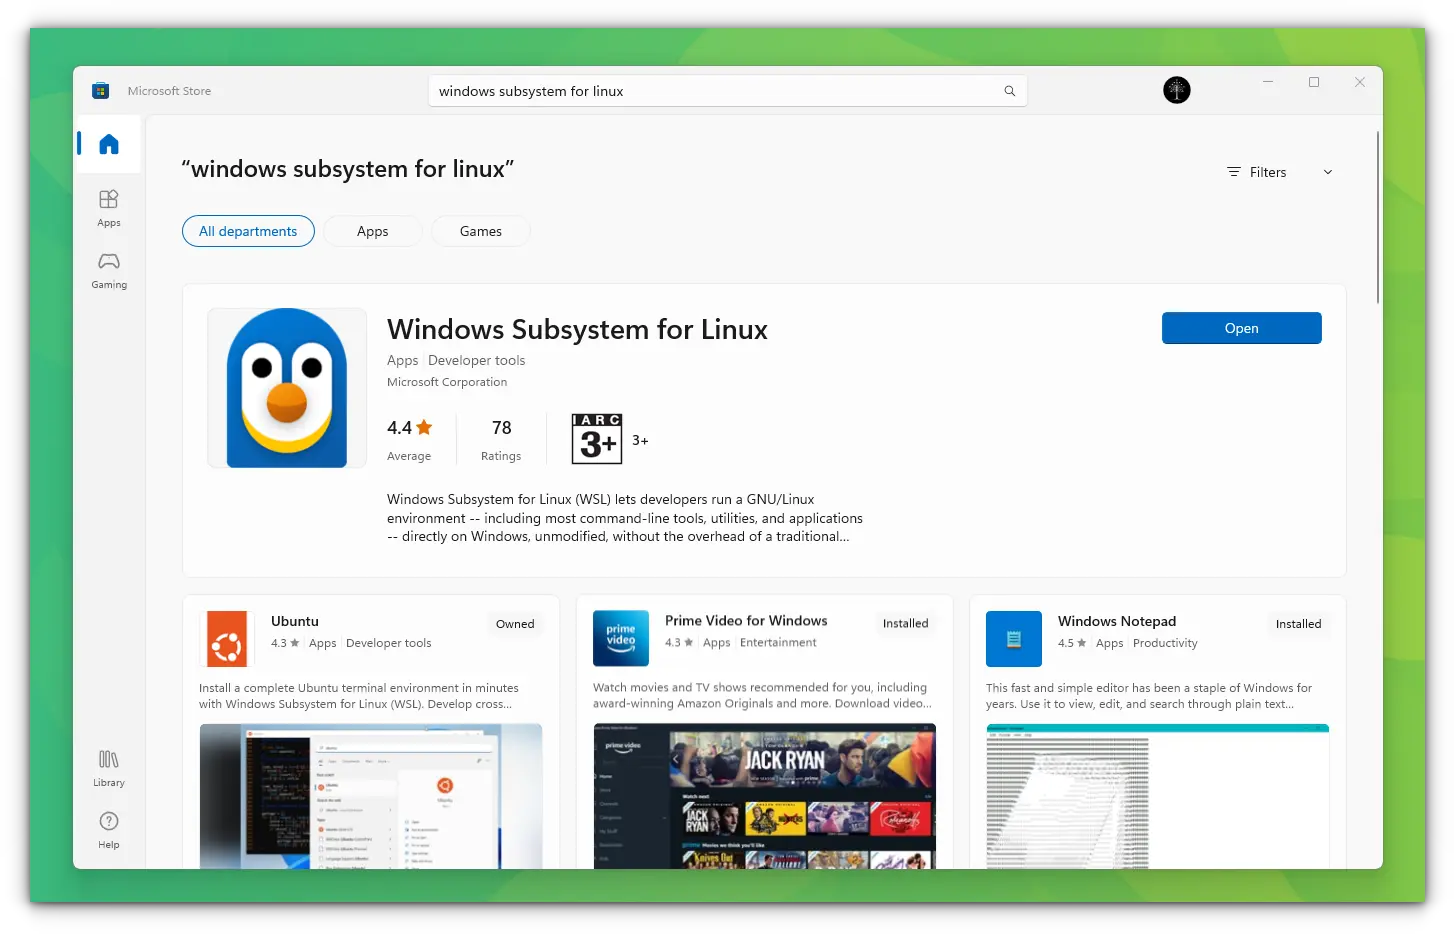 Windows Subsystem for Linux Application in Microsoft Store